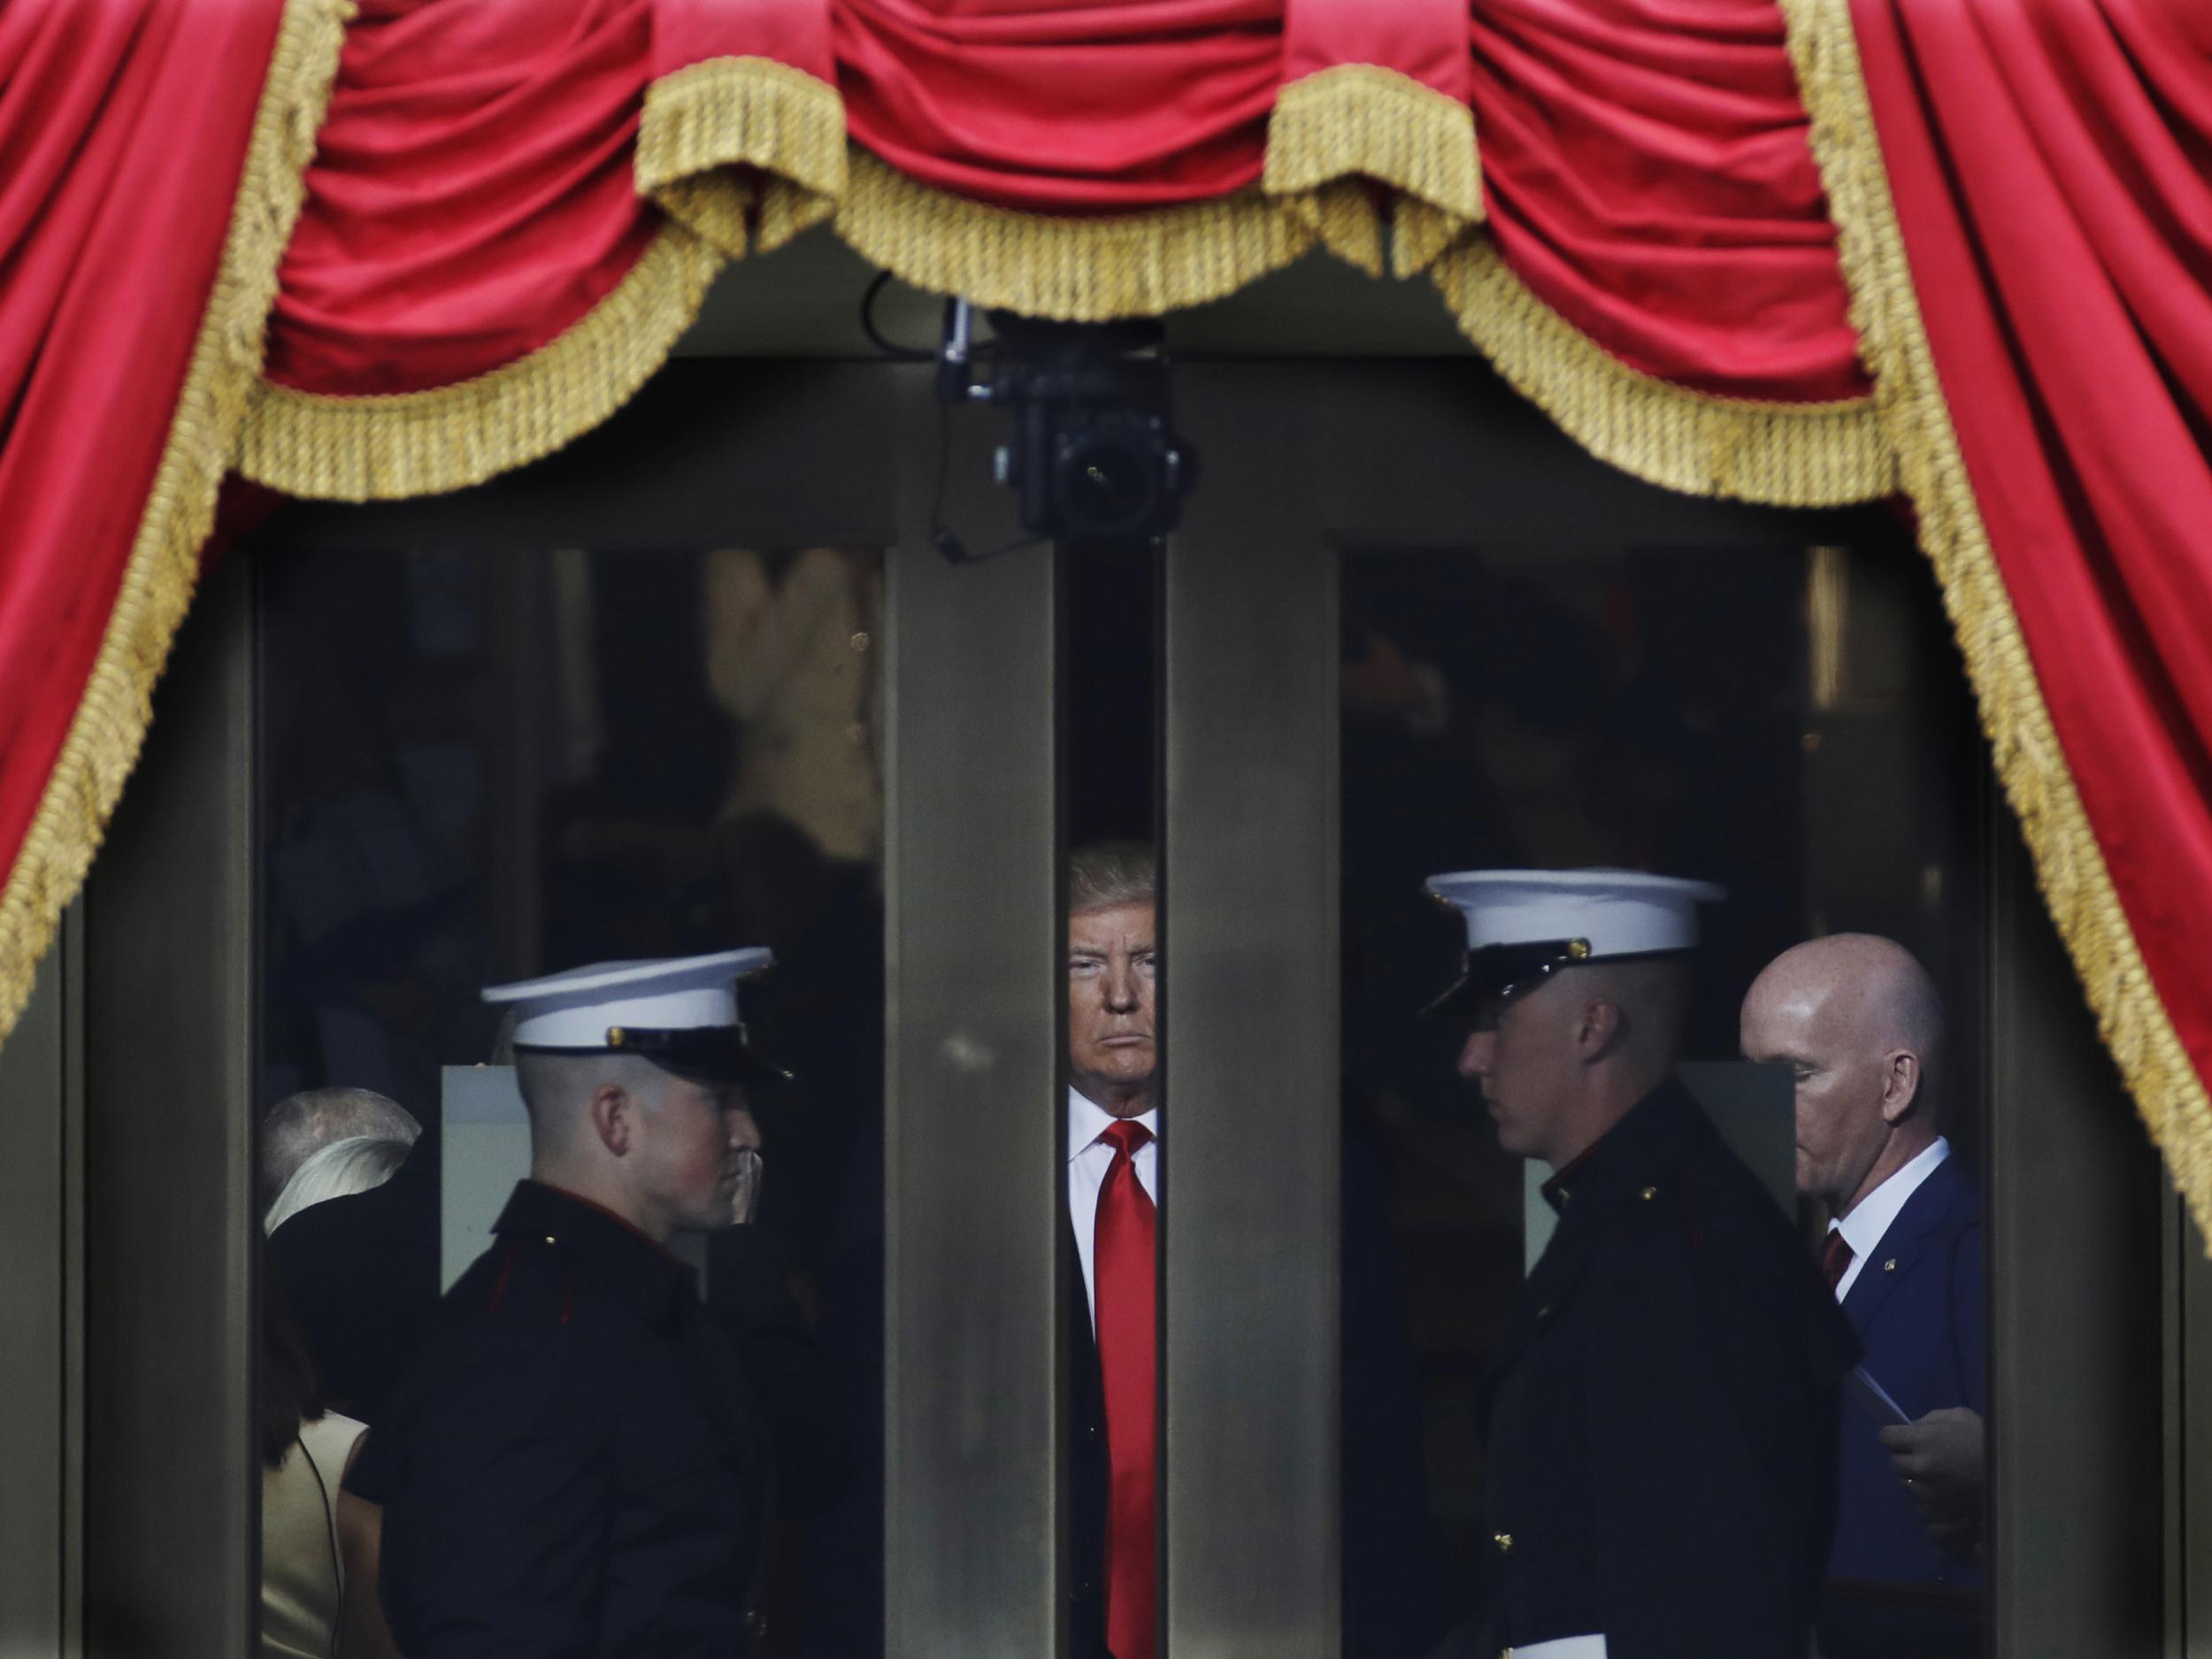 Donald Trump waiting to step out onto the portico for his presidential inauguration at the US Capitol in Washington